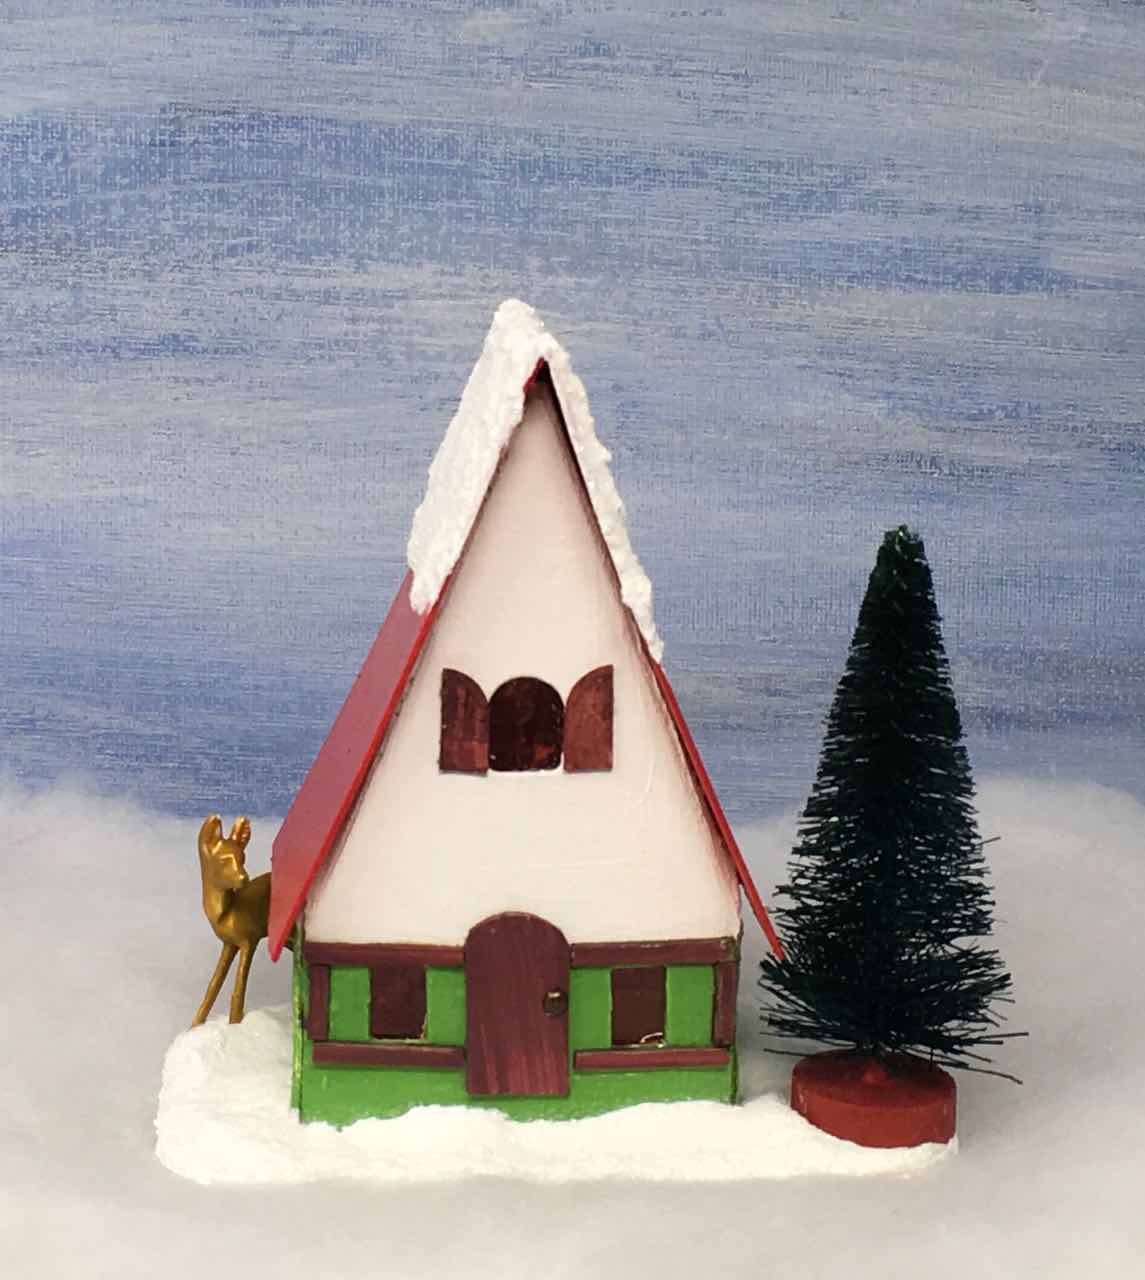 Front view of the miniature Swiss Chalet Christmas Putz house you can make easily for your Christmas village